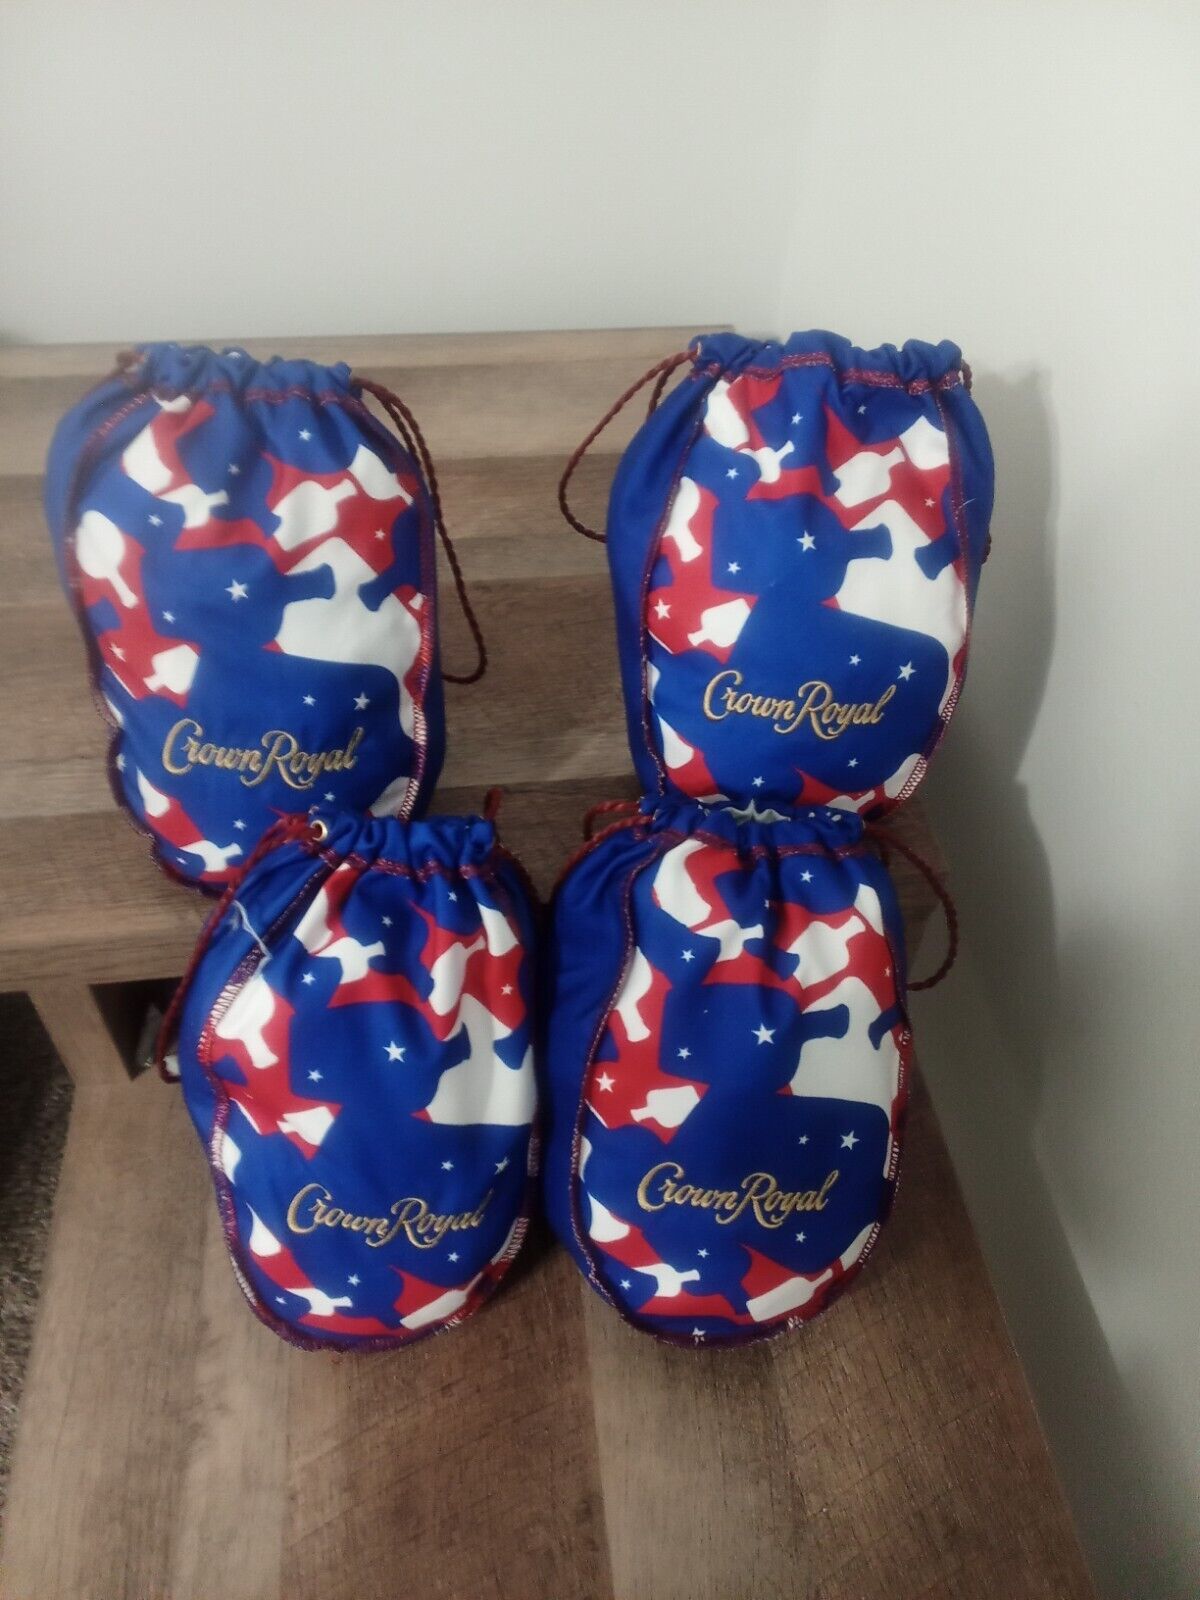 Lot of 4 Red, White, and Blue Camo Limited Edition Crown Royal Bags 750Ml